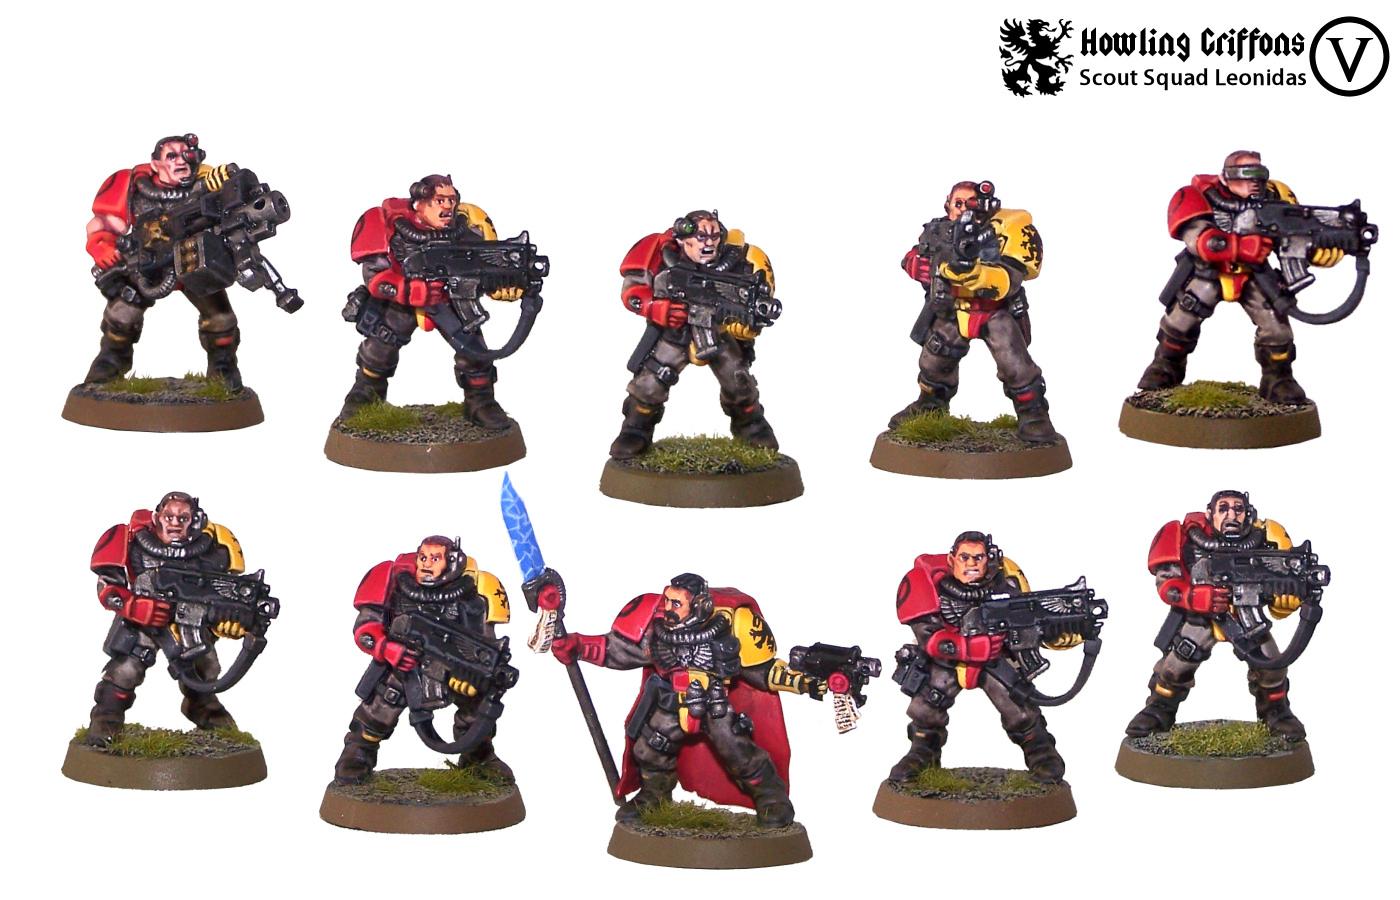 Angry, Heavy Bolter, Howling Griffons, Leonidas, Scouts, Space Marines